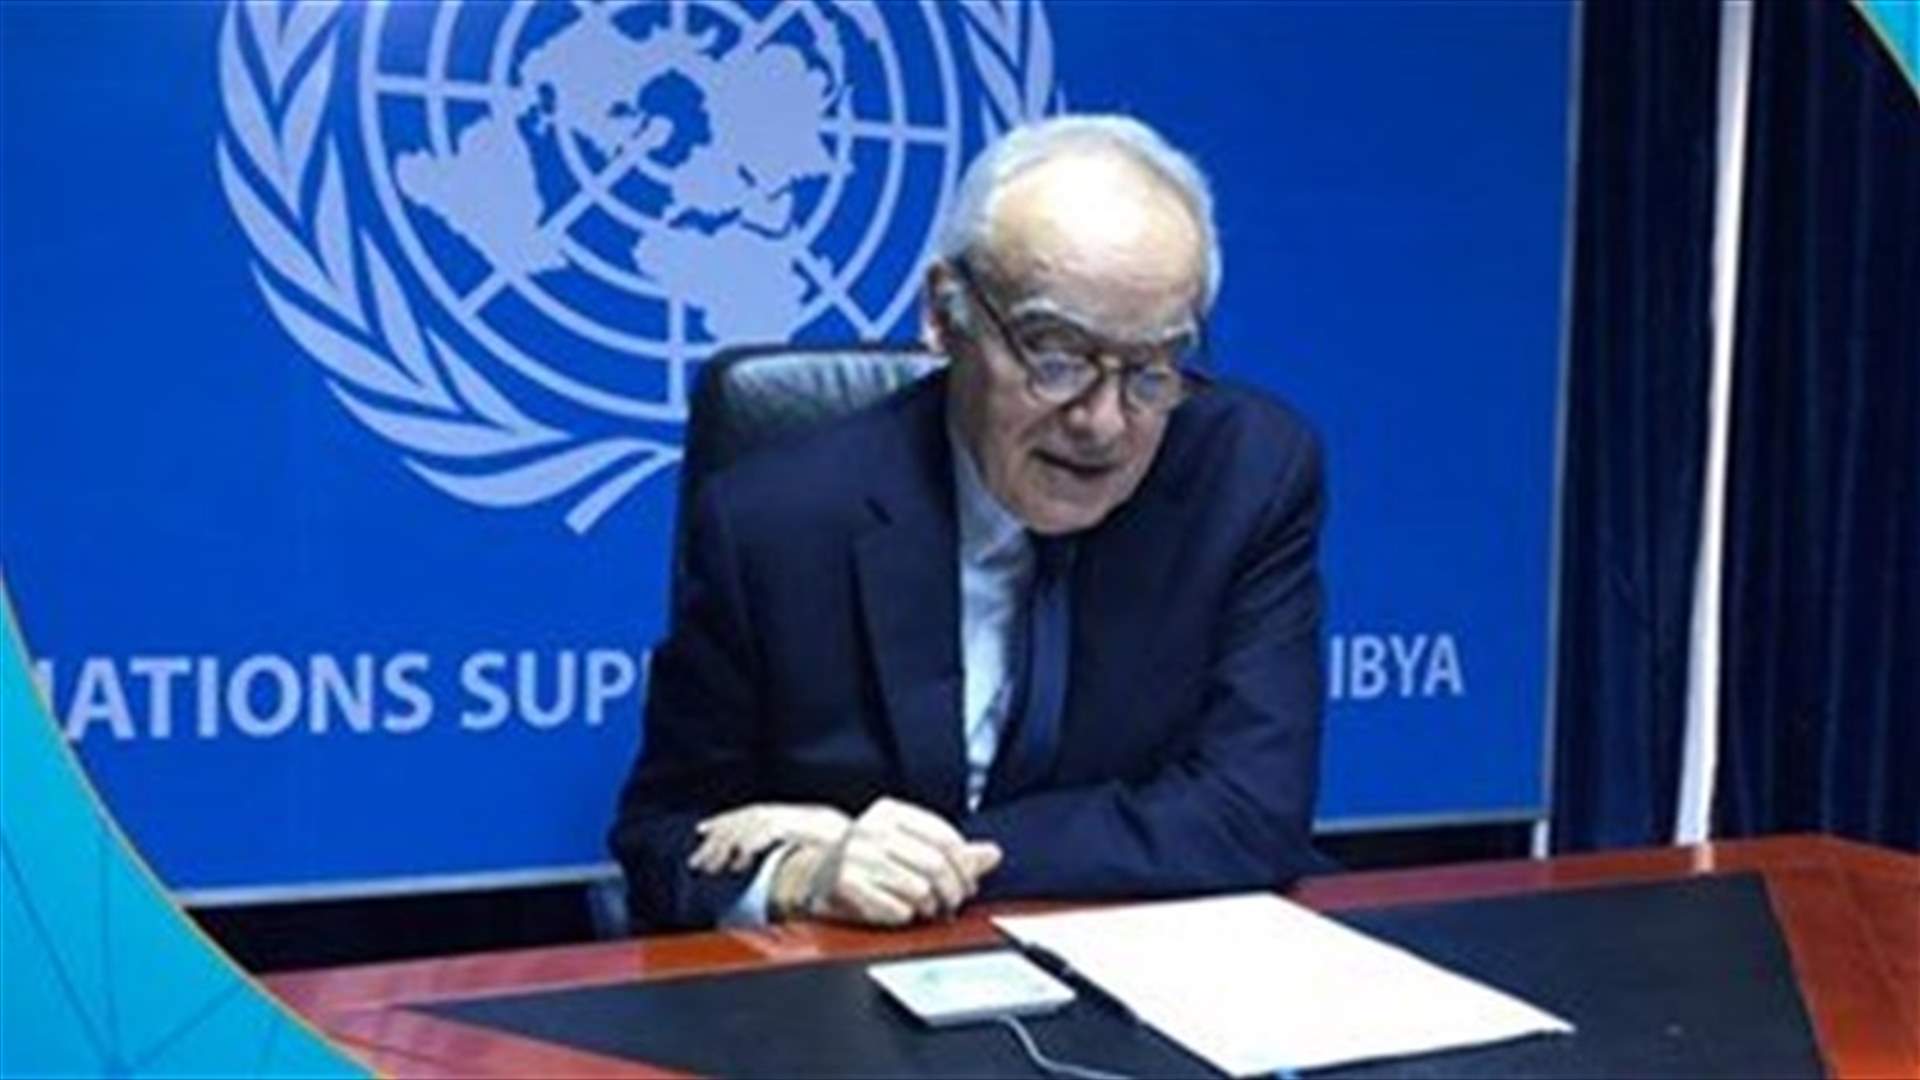 UN Libya envoy hopes, but cannot predict, eastern oil ports closure ends in few days